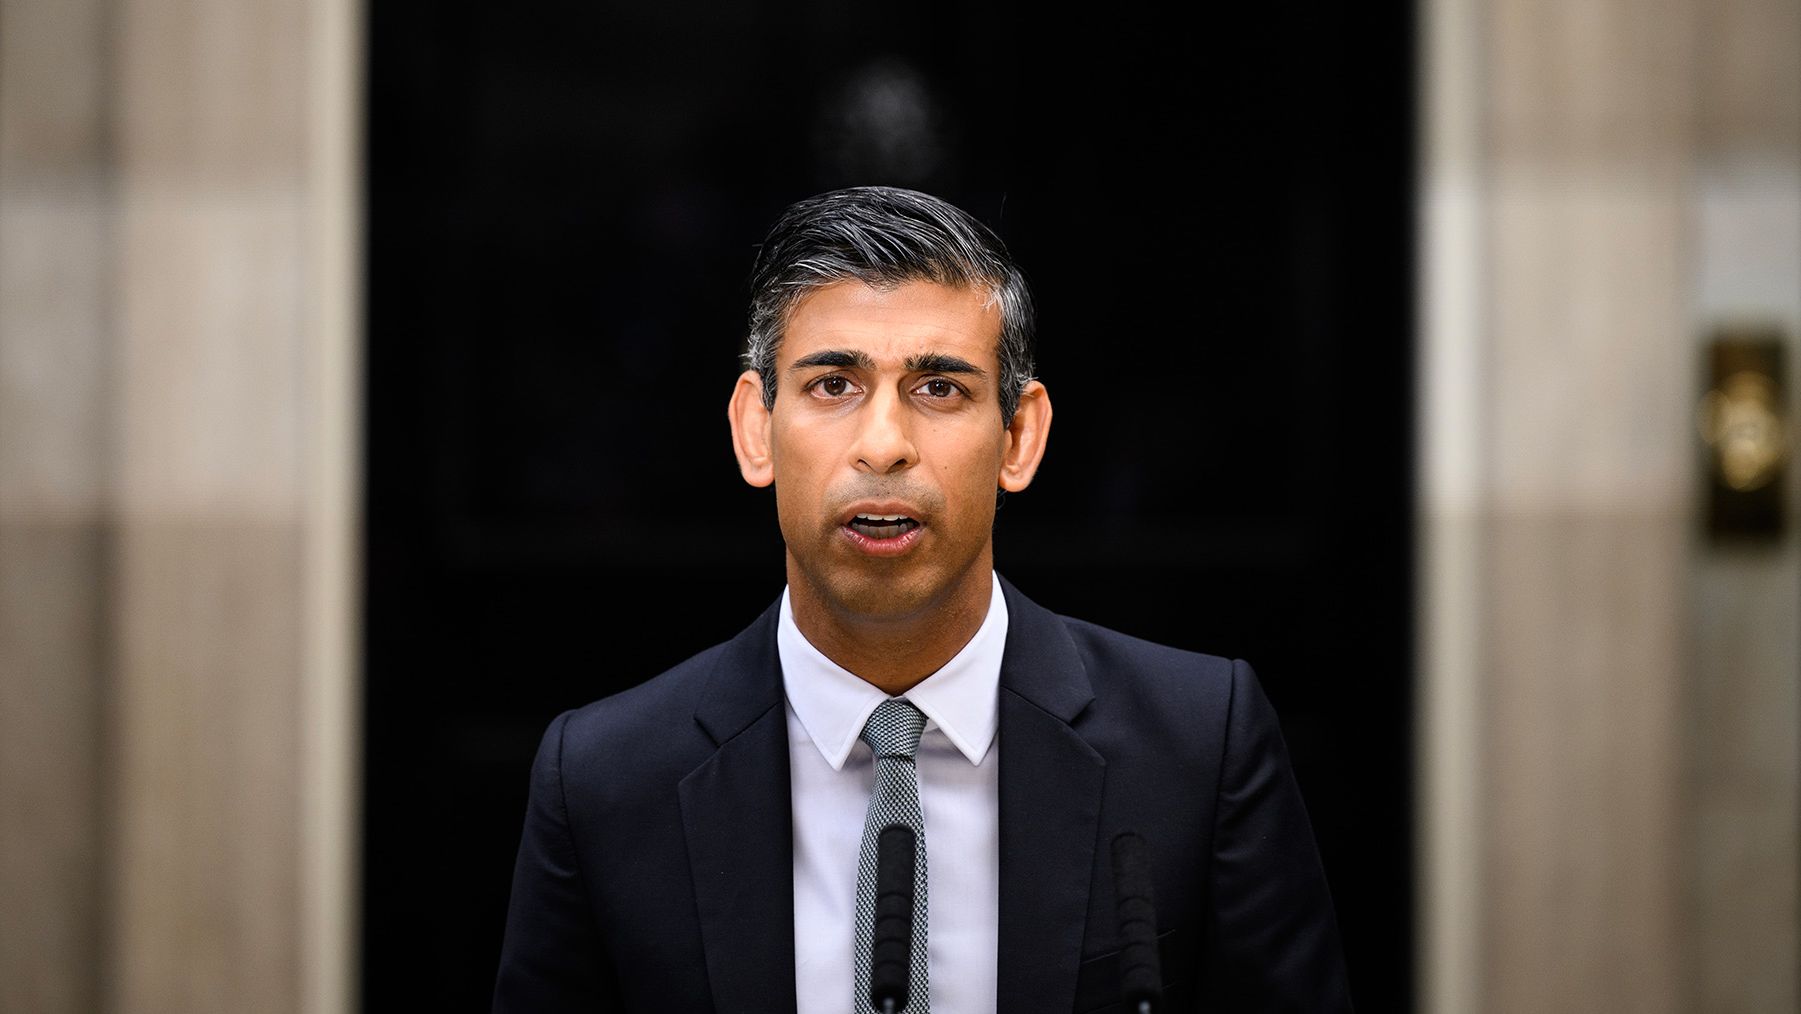 British Prime Minister Rishi Sunak makes a statement outside No. 10 Downing Street after taking office on Tuesday, October 25.